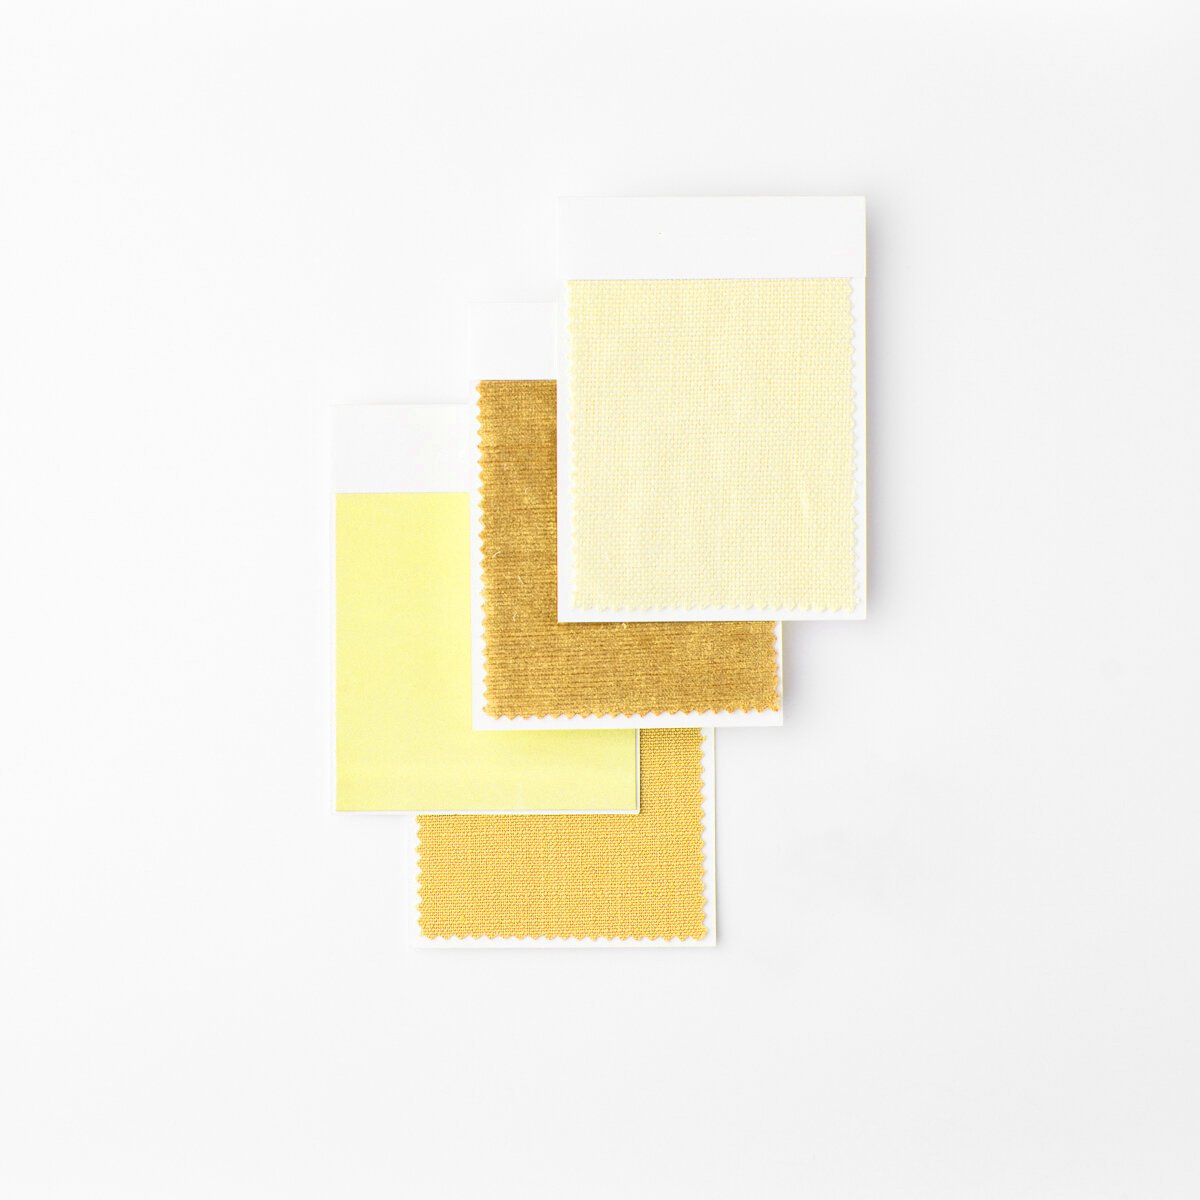 Golden-hour_yellow_Social-Squares_Styled-Stock_01109.jpg